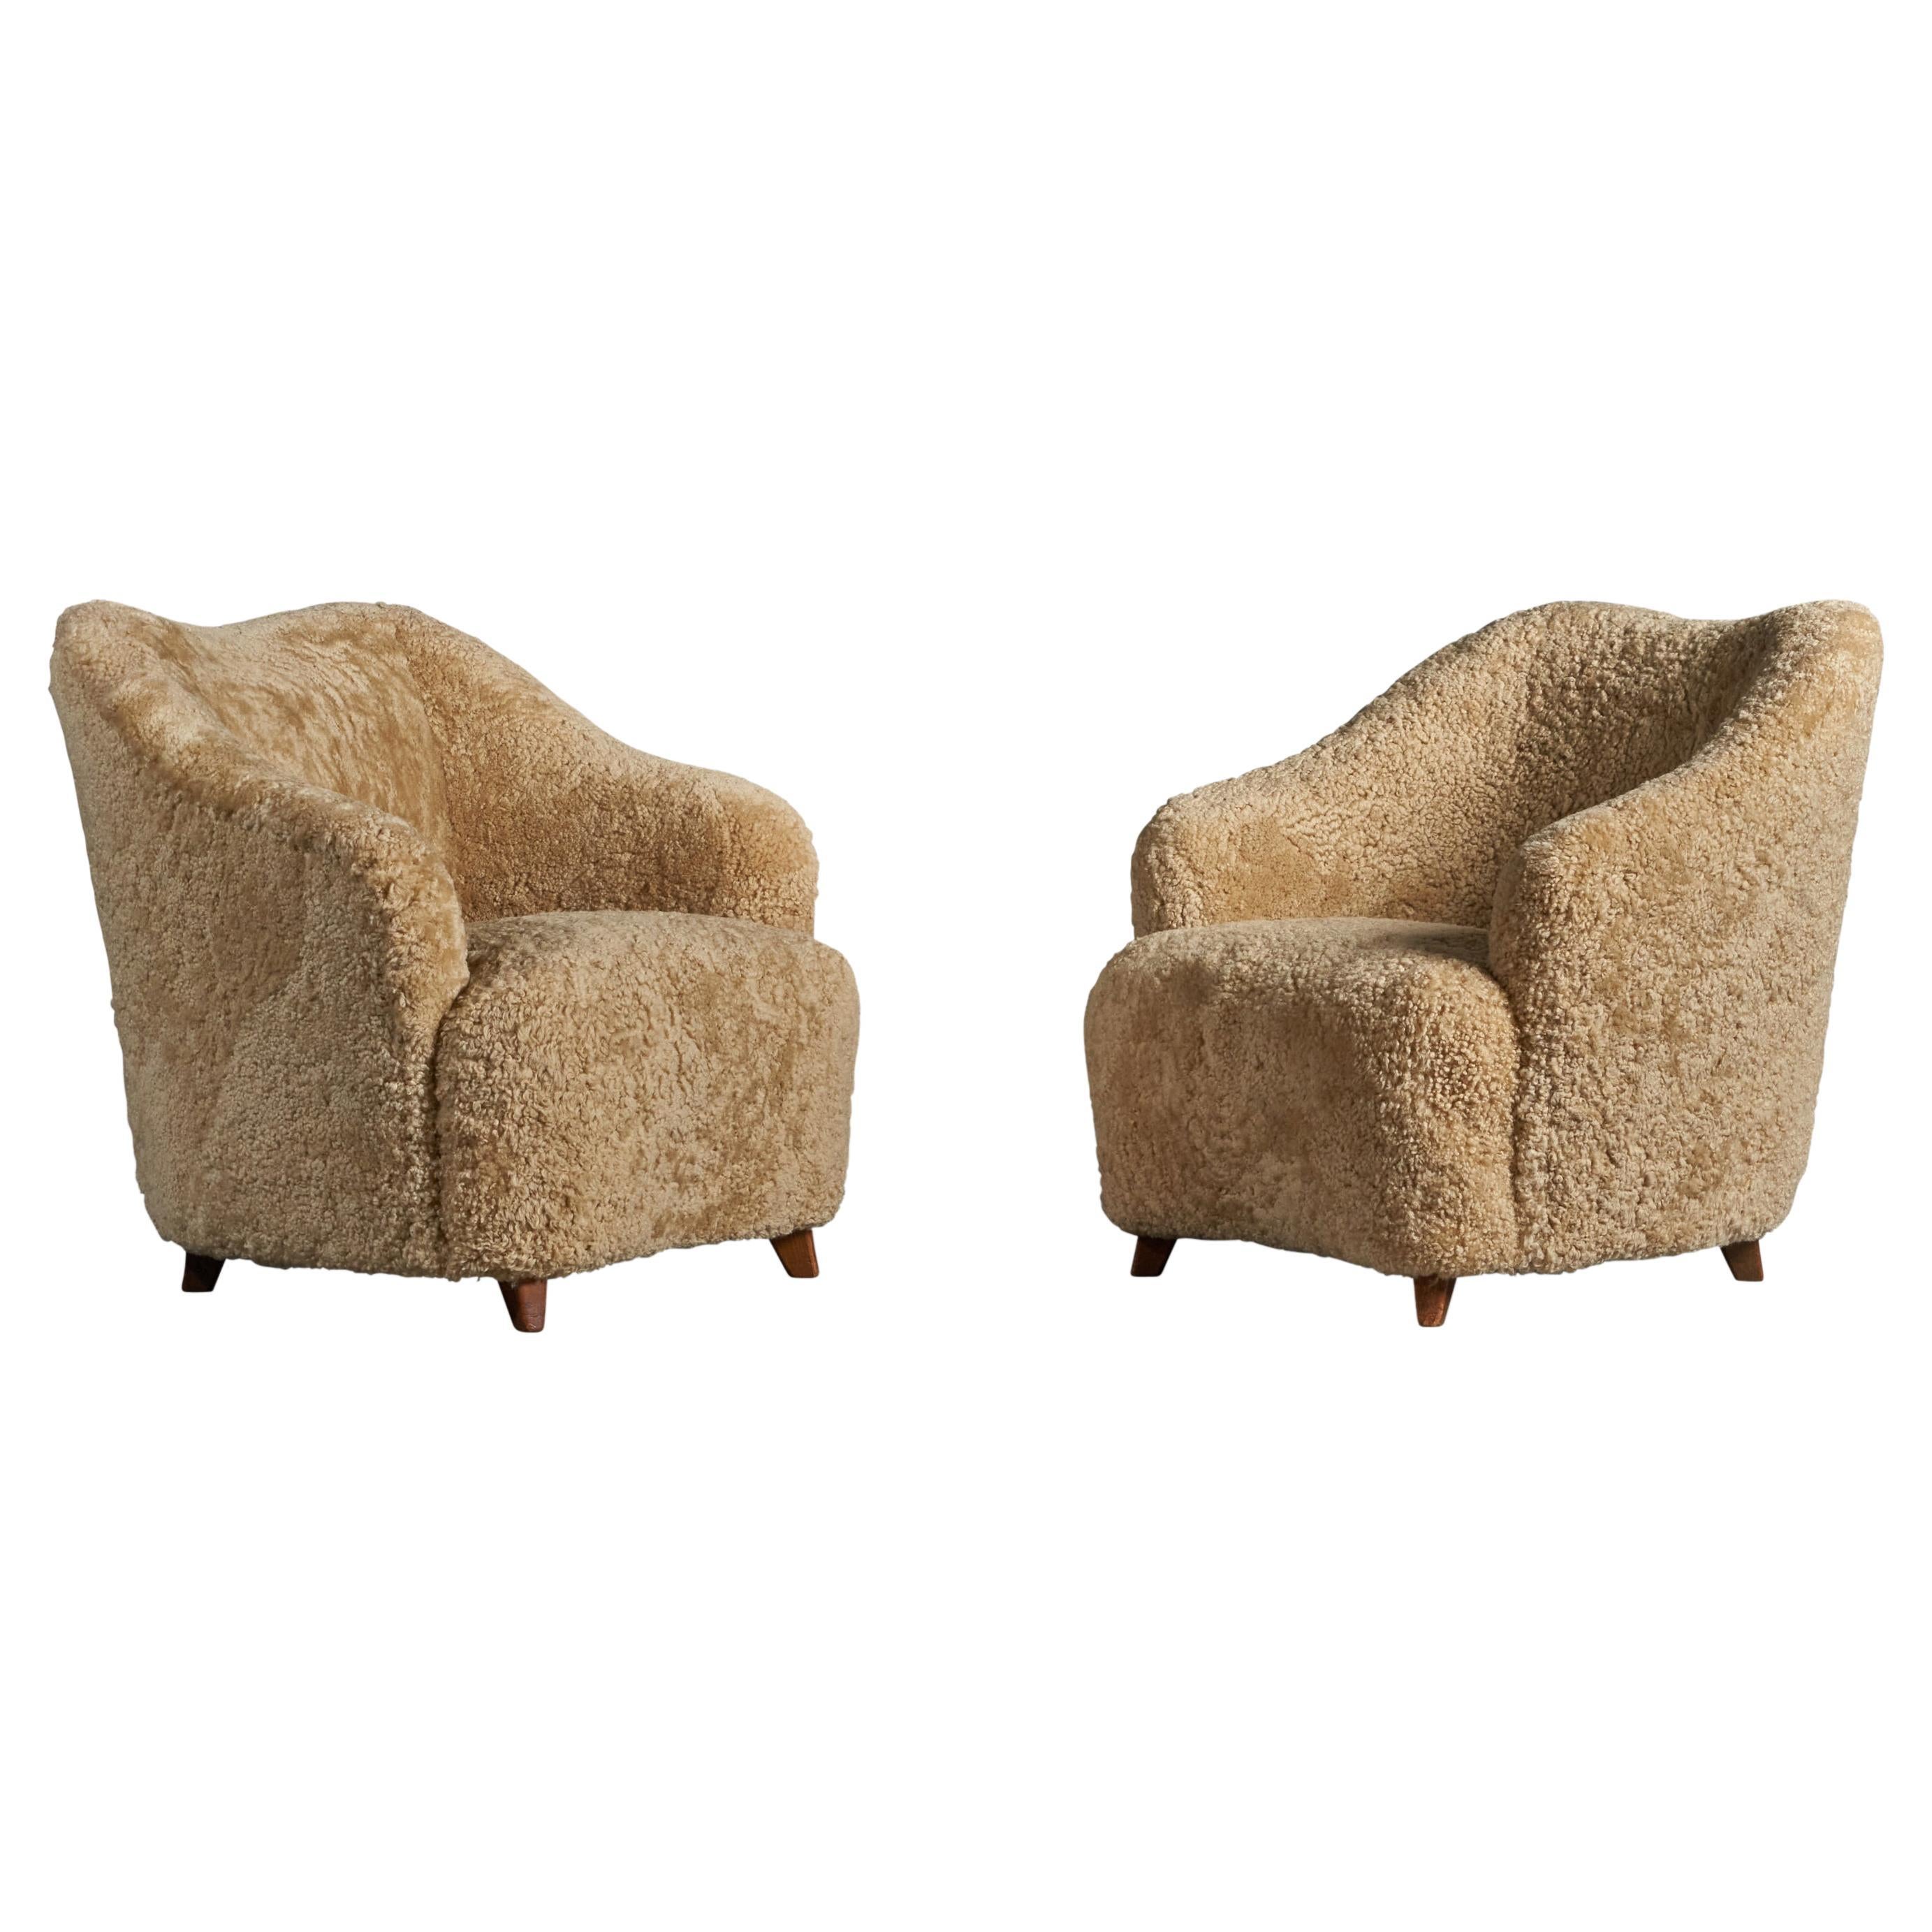 Gio Ponti Attribution, Lounge Chairs, Shearling, Wood, Italy, 1940s For Sale